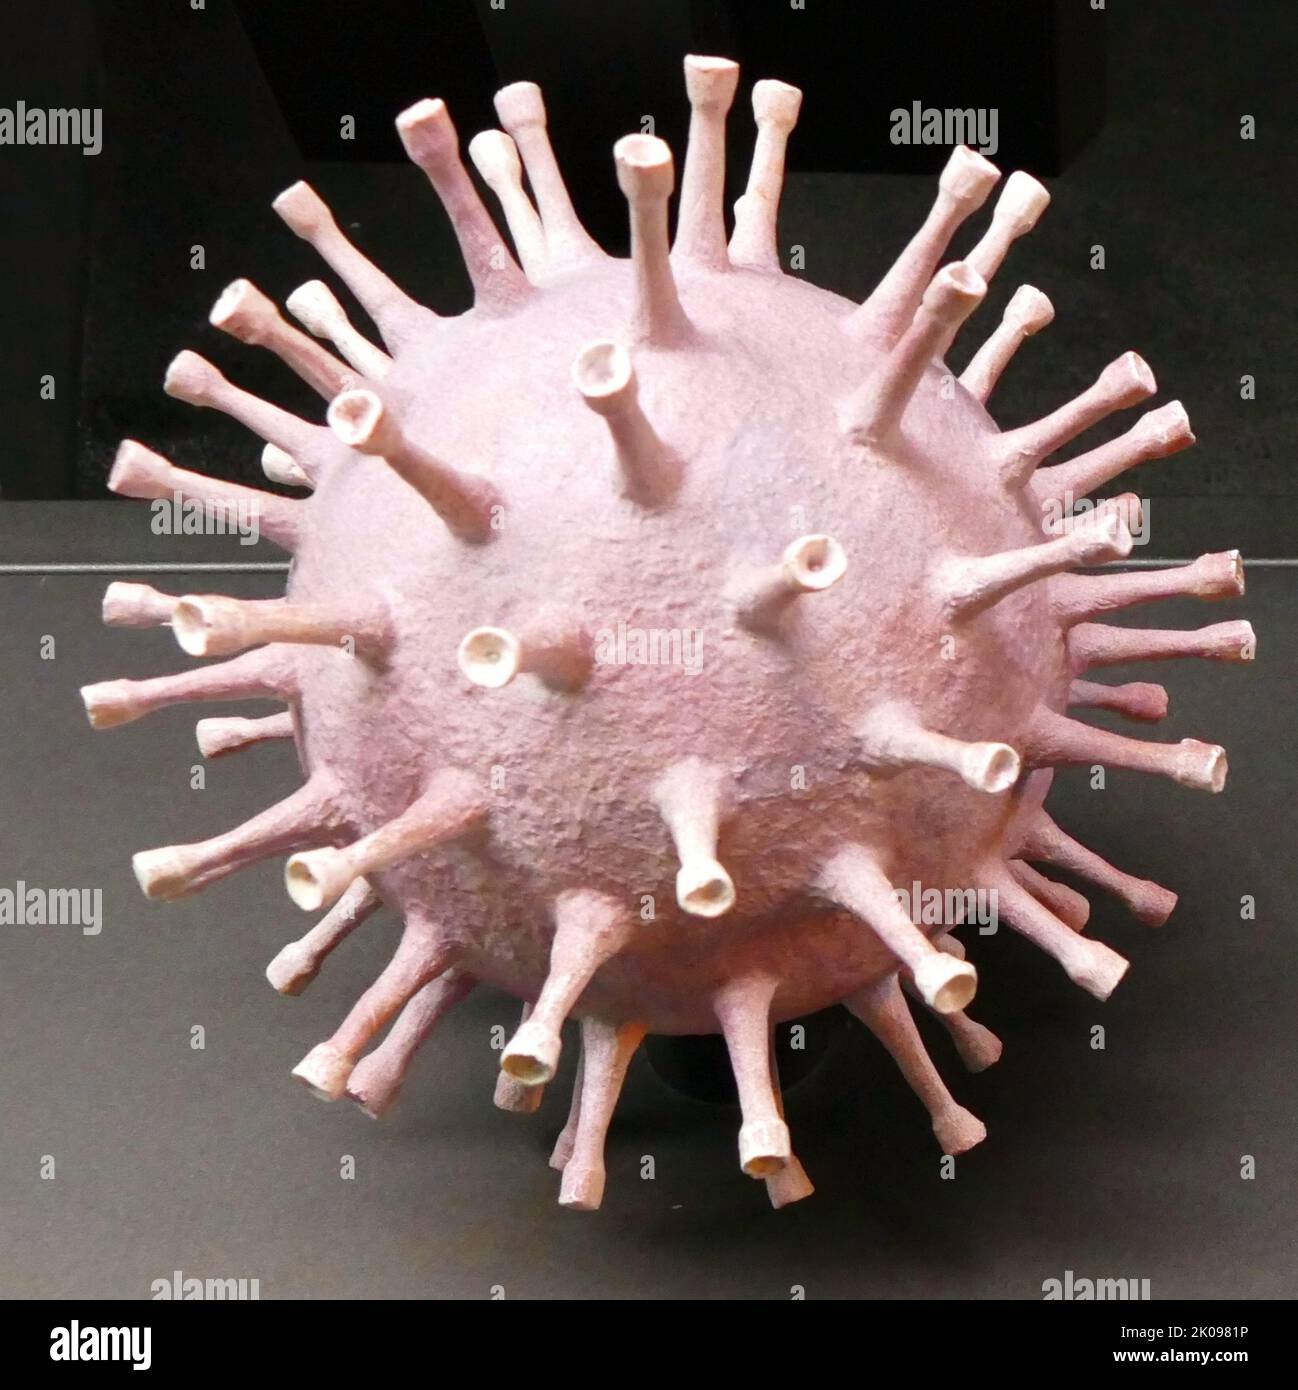 Model of a virus. A virus is a submicroscopic infectious agent that replicates only inside the living cells of an organism. Viruses infect all life forms, from animals and plants to microorganisms, including bacteria and archaea. Stock Photo